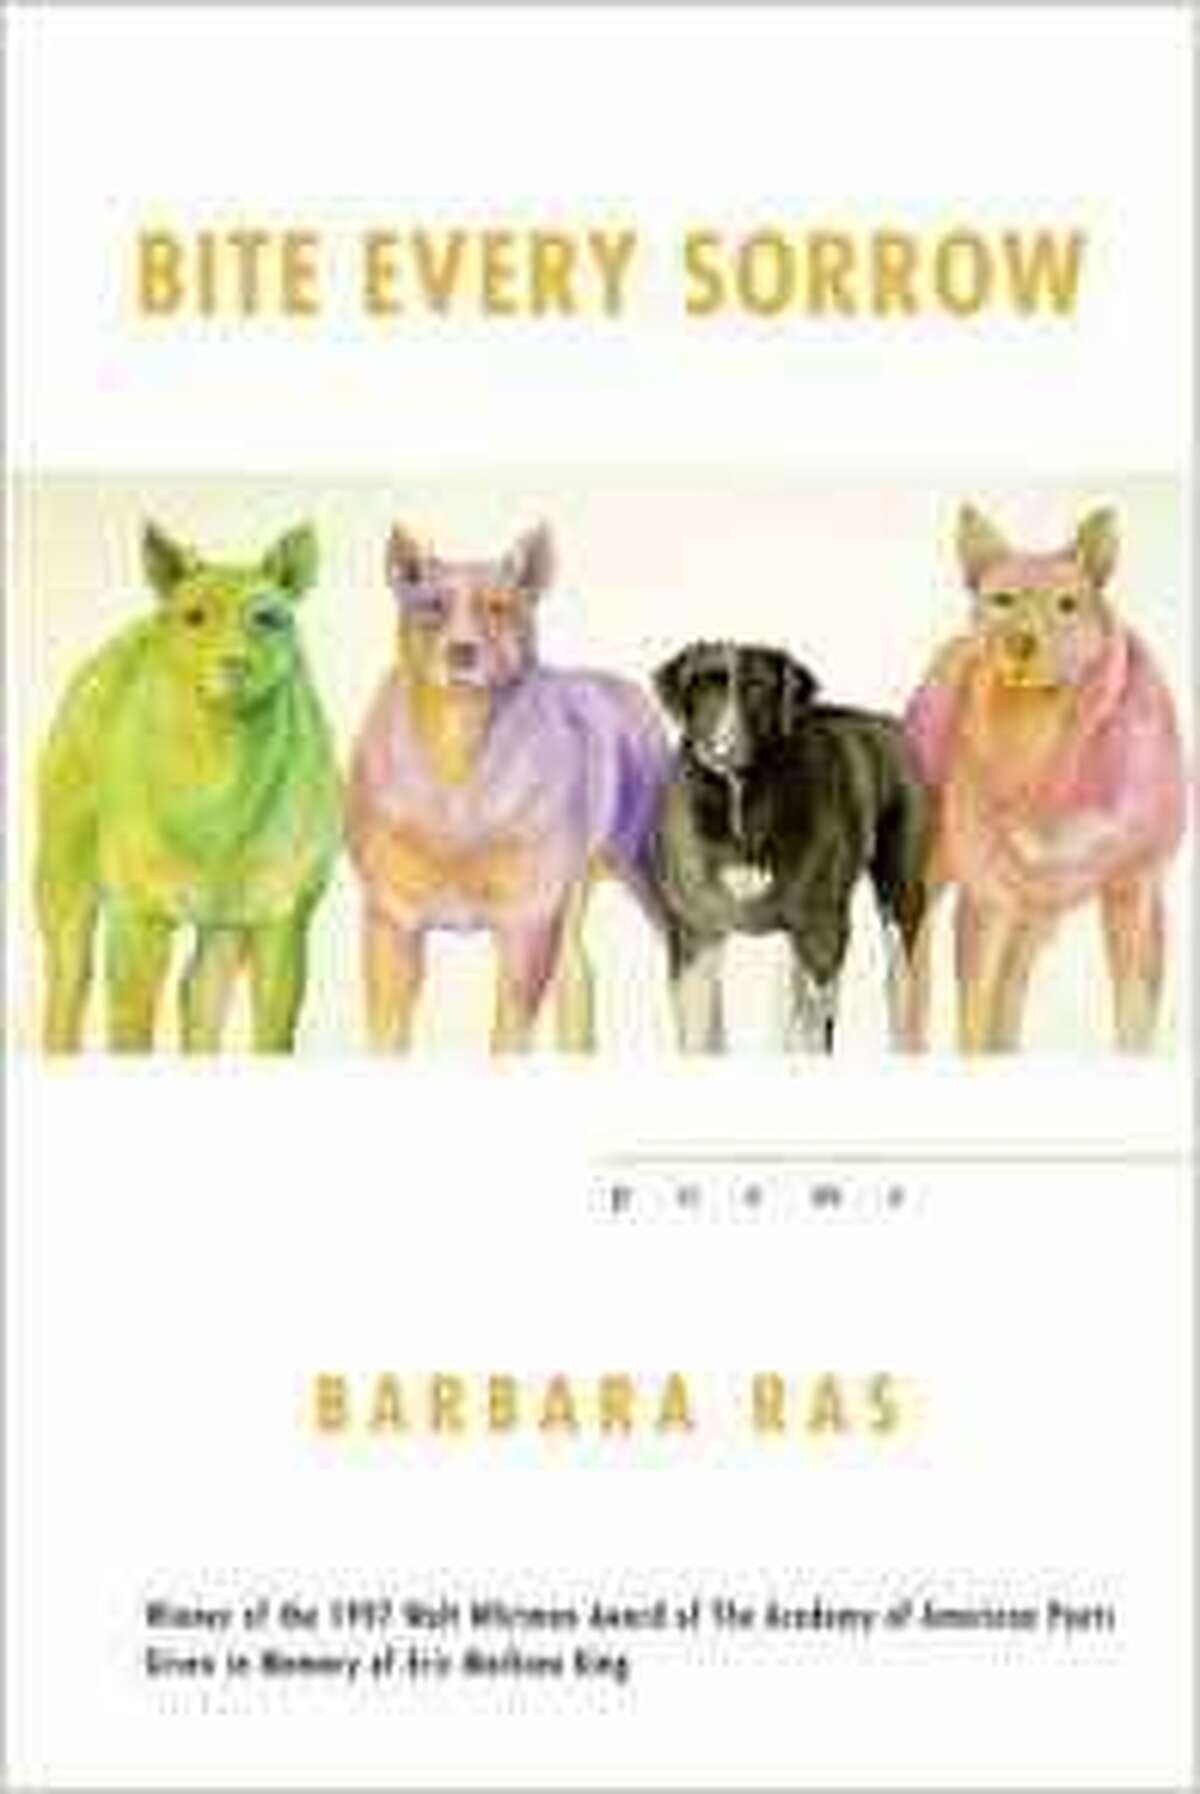 Barbara Ras wasn’t just an editor, but an award-winning poet herself. Her first collection of poetry, “Bite Every Sorrow,” won the 1997 Walt Whitman Award and subsequently received the Kate Tufts Discovery Award.